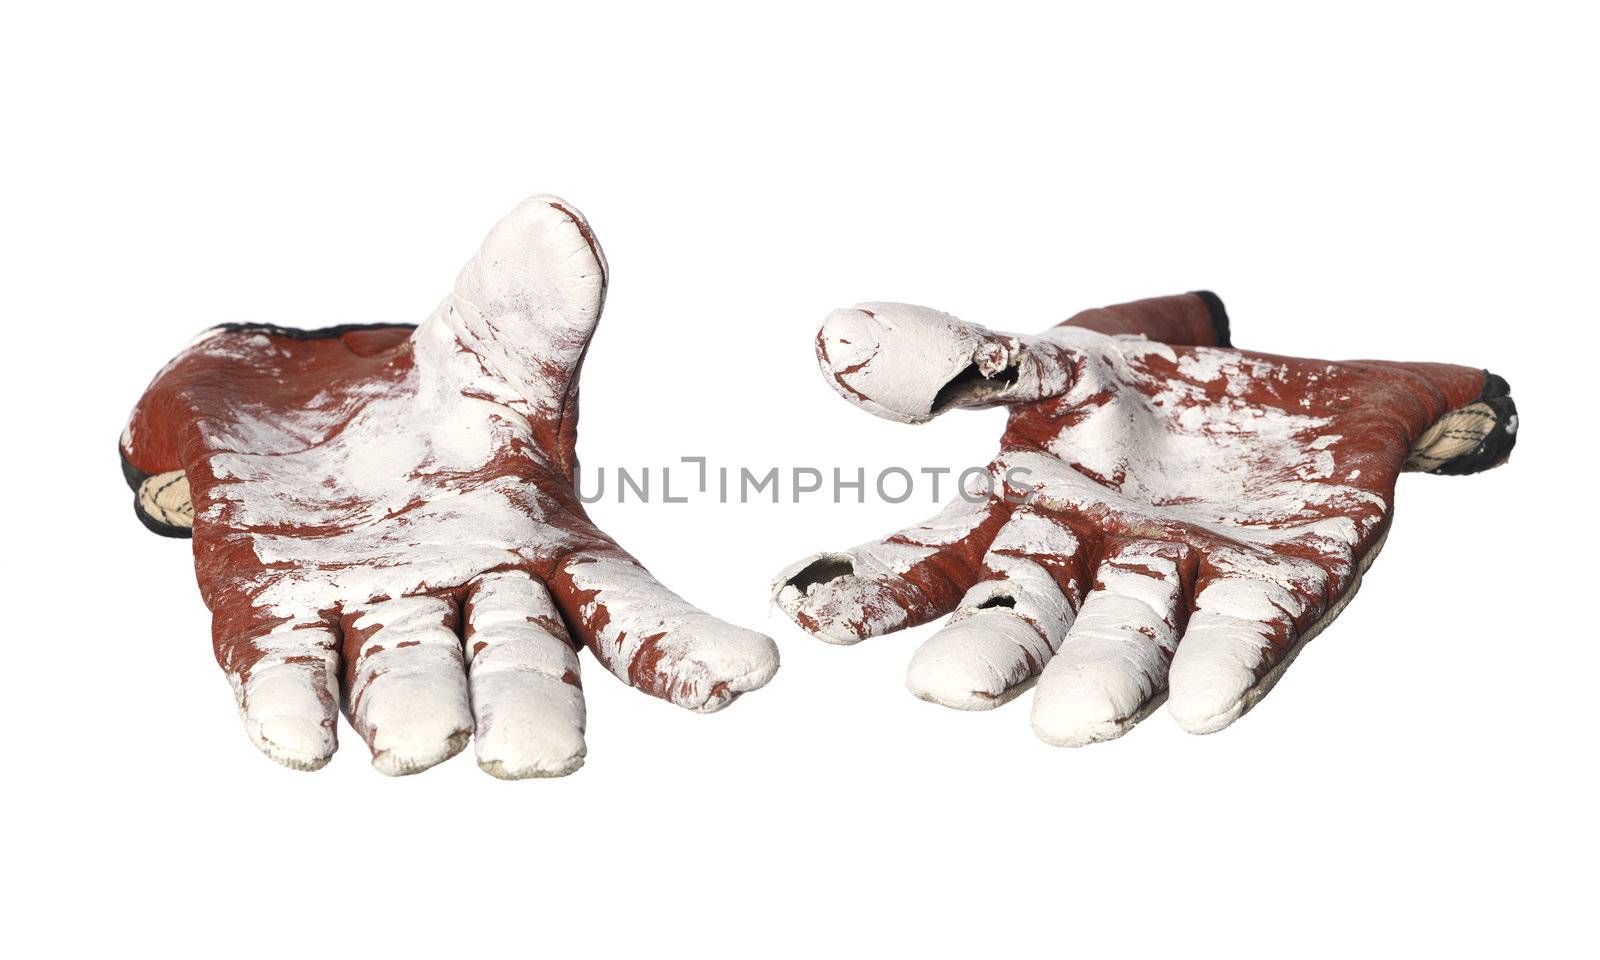 Pair of Protective gloves by gemenacom